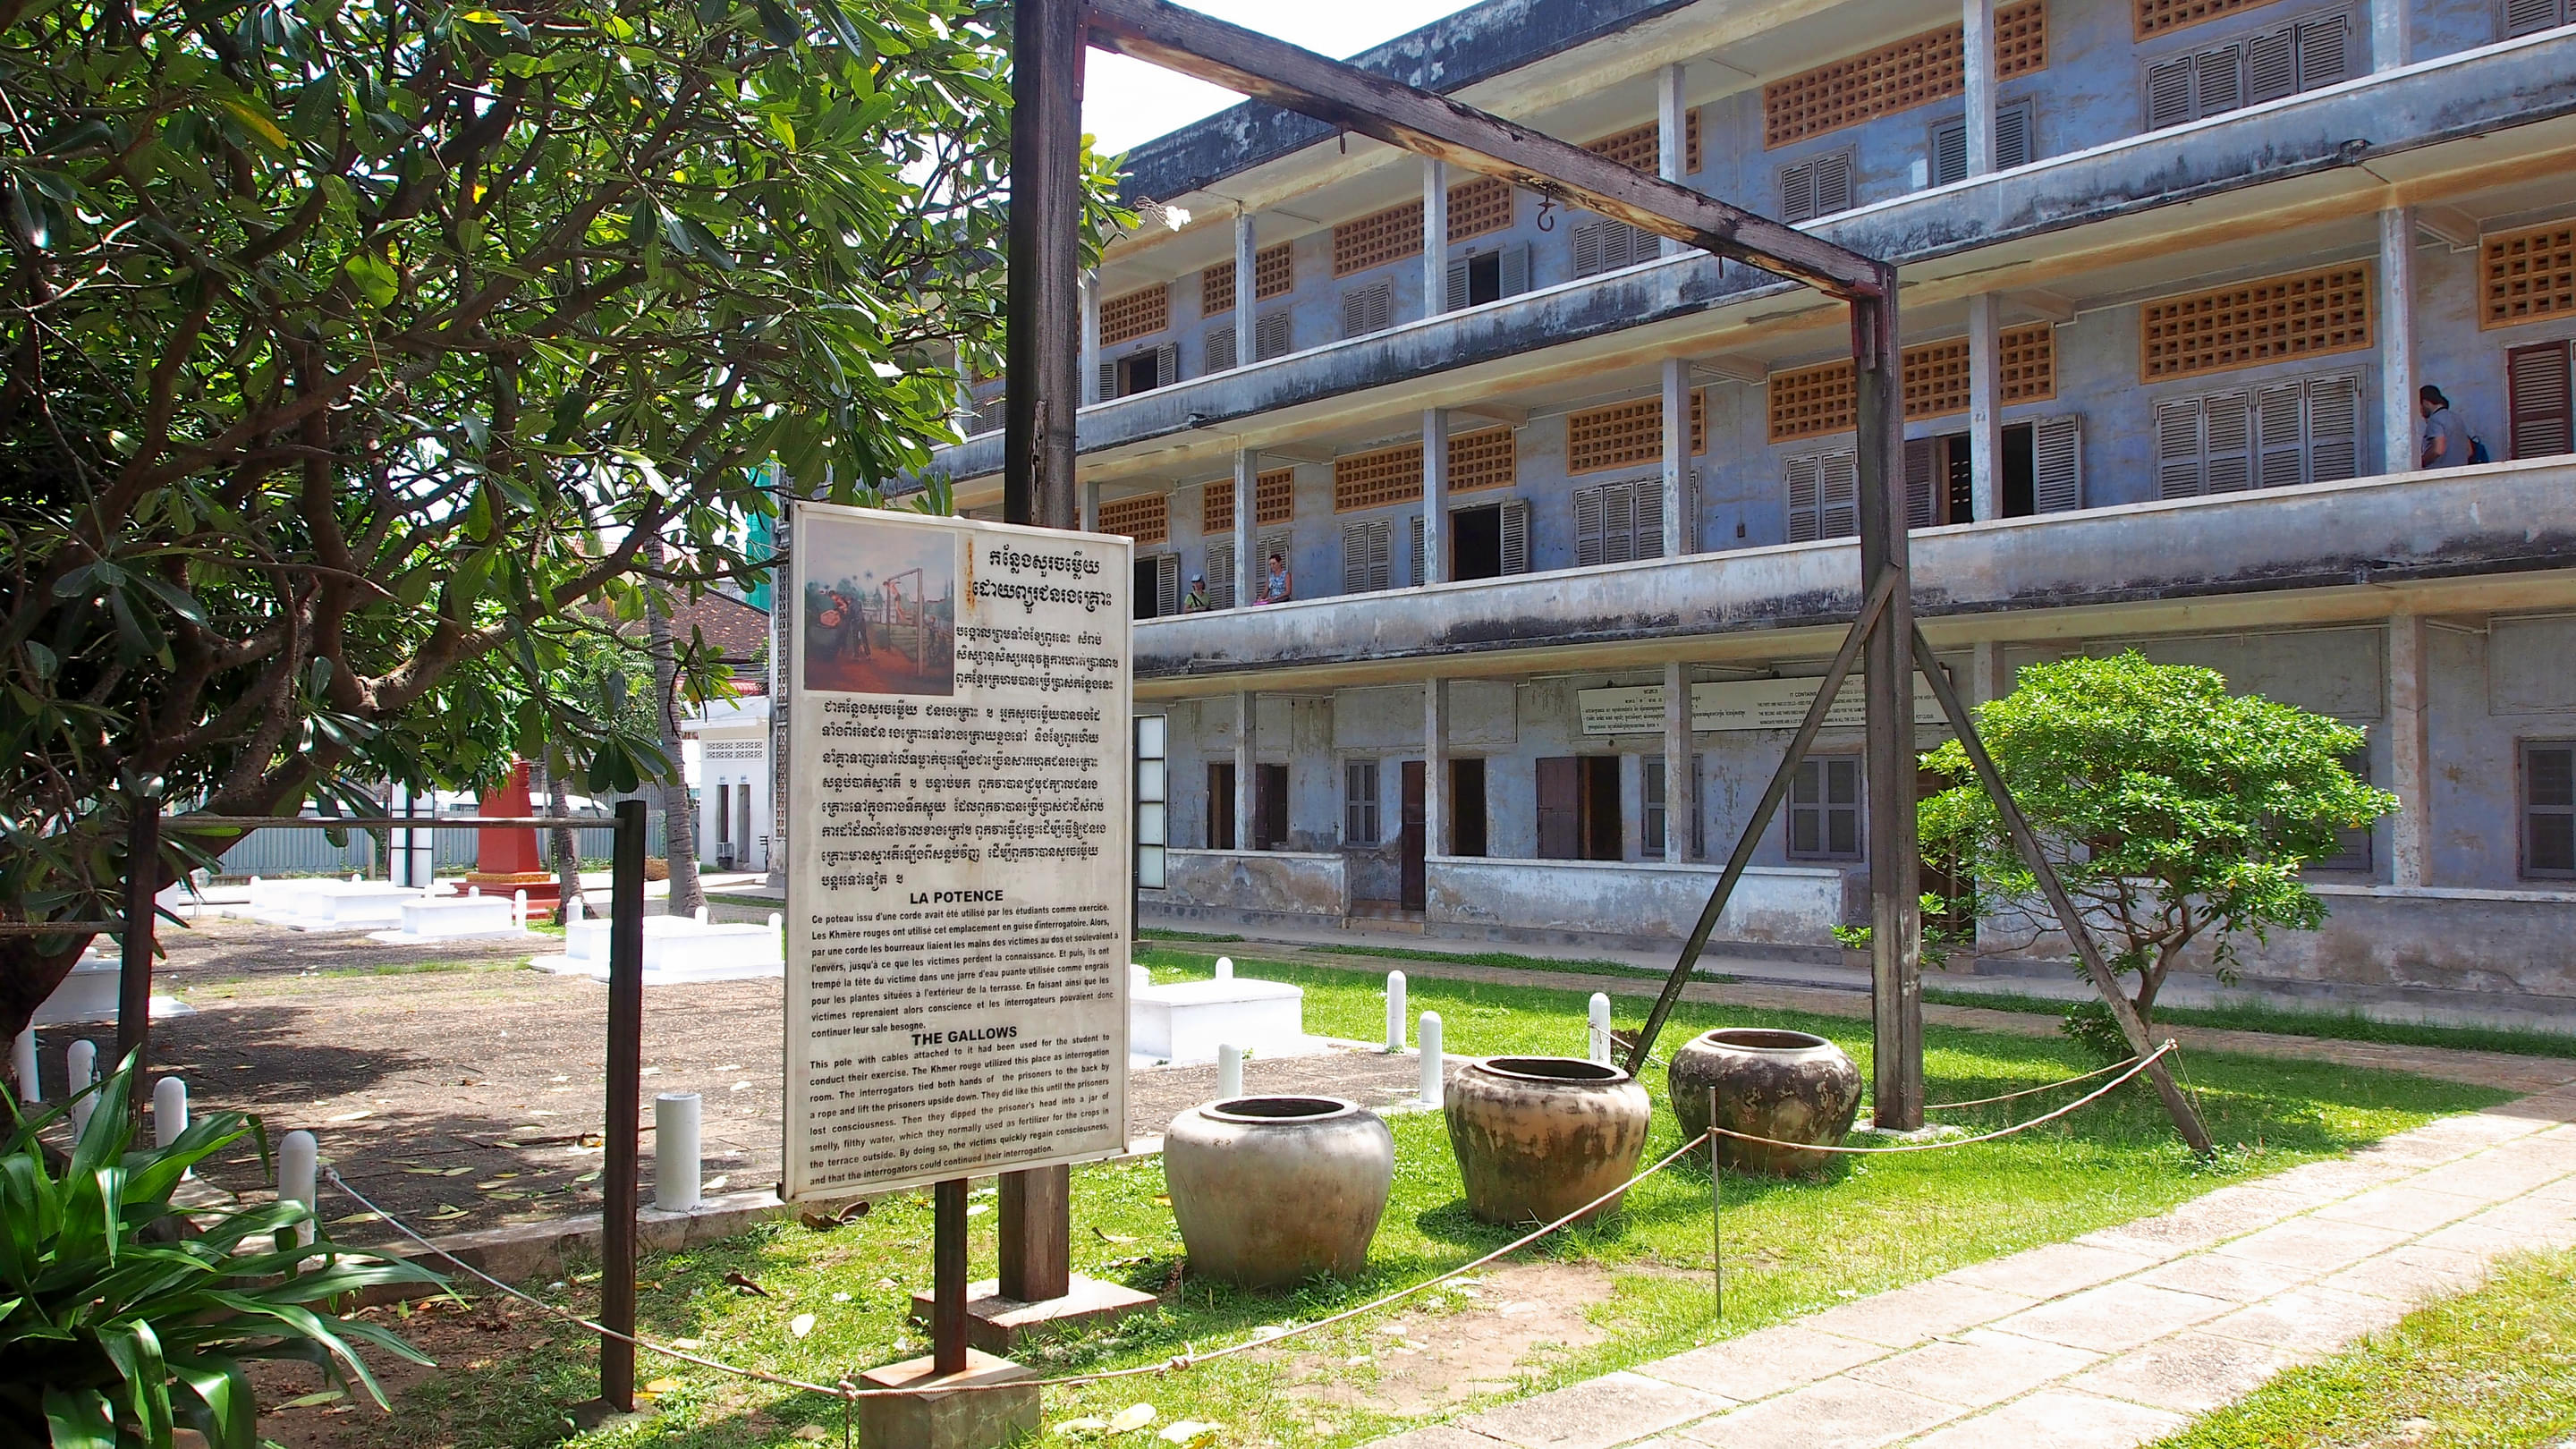 Tuol Sleng Genocide Museum Overview